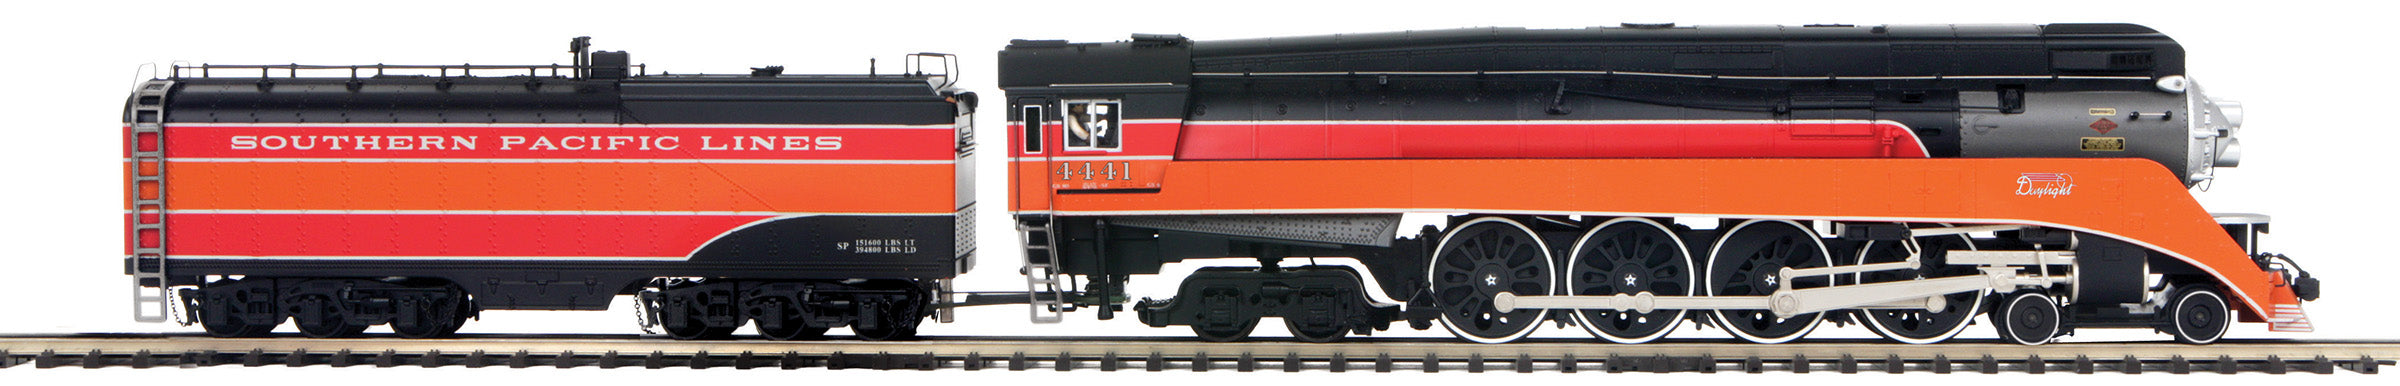 MTH 20-3918-1 - 4-8-4 GS-4 Steam Engine "Southern Pacific Lines" #4441 w/ PS3 (Daylight Small Lettering)